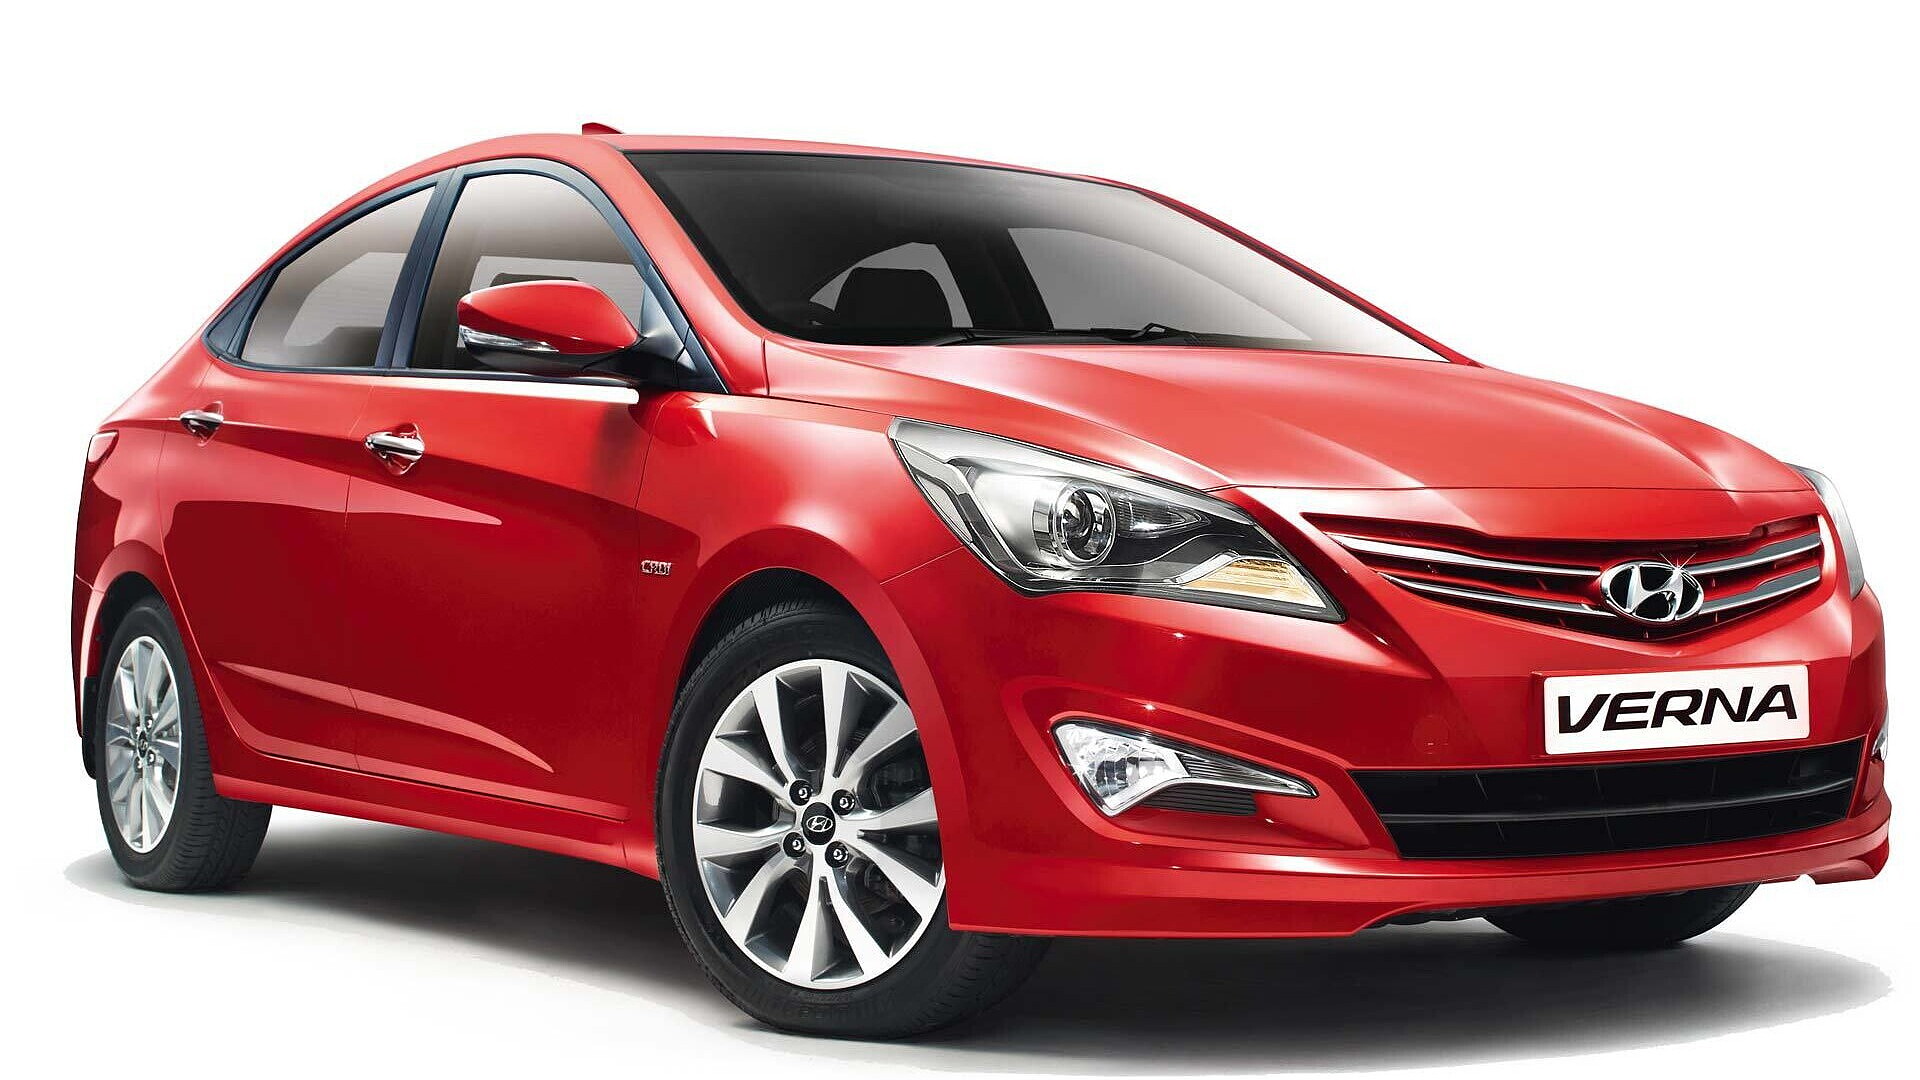 Hyundai Verna [2015-2017] Images - Interior & Exterior Photo Gallery [20+  Images] - CarWale